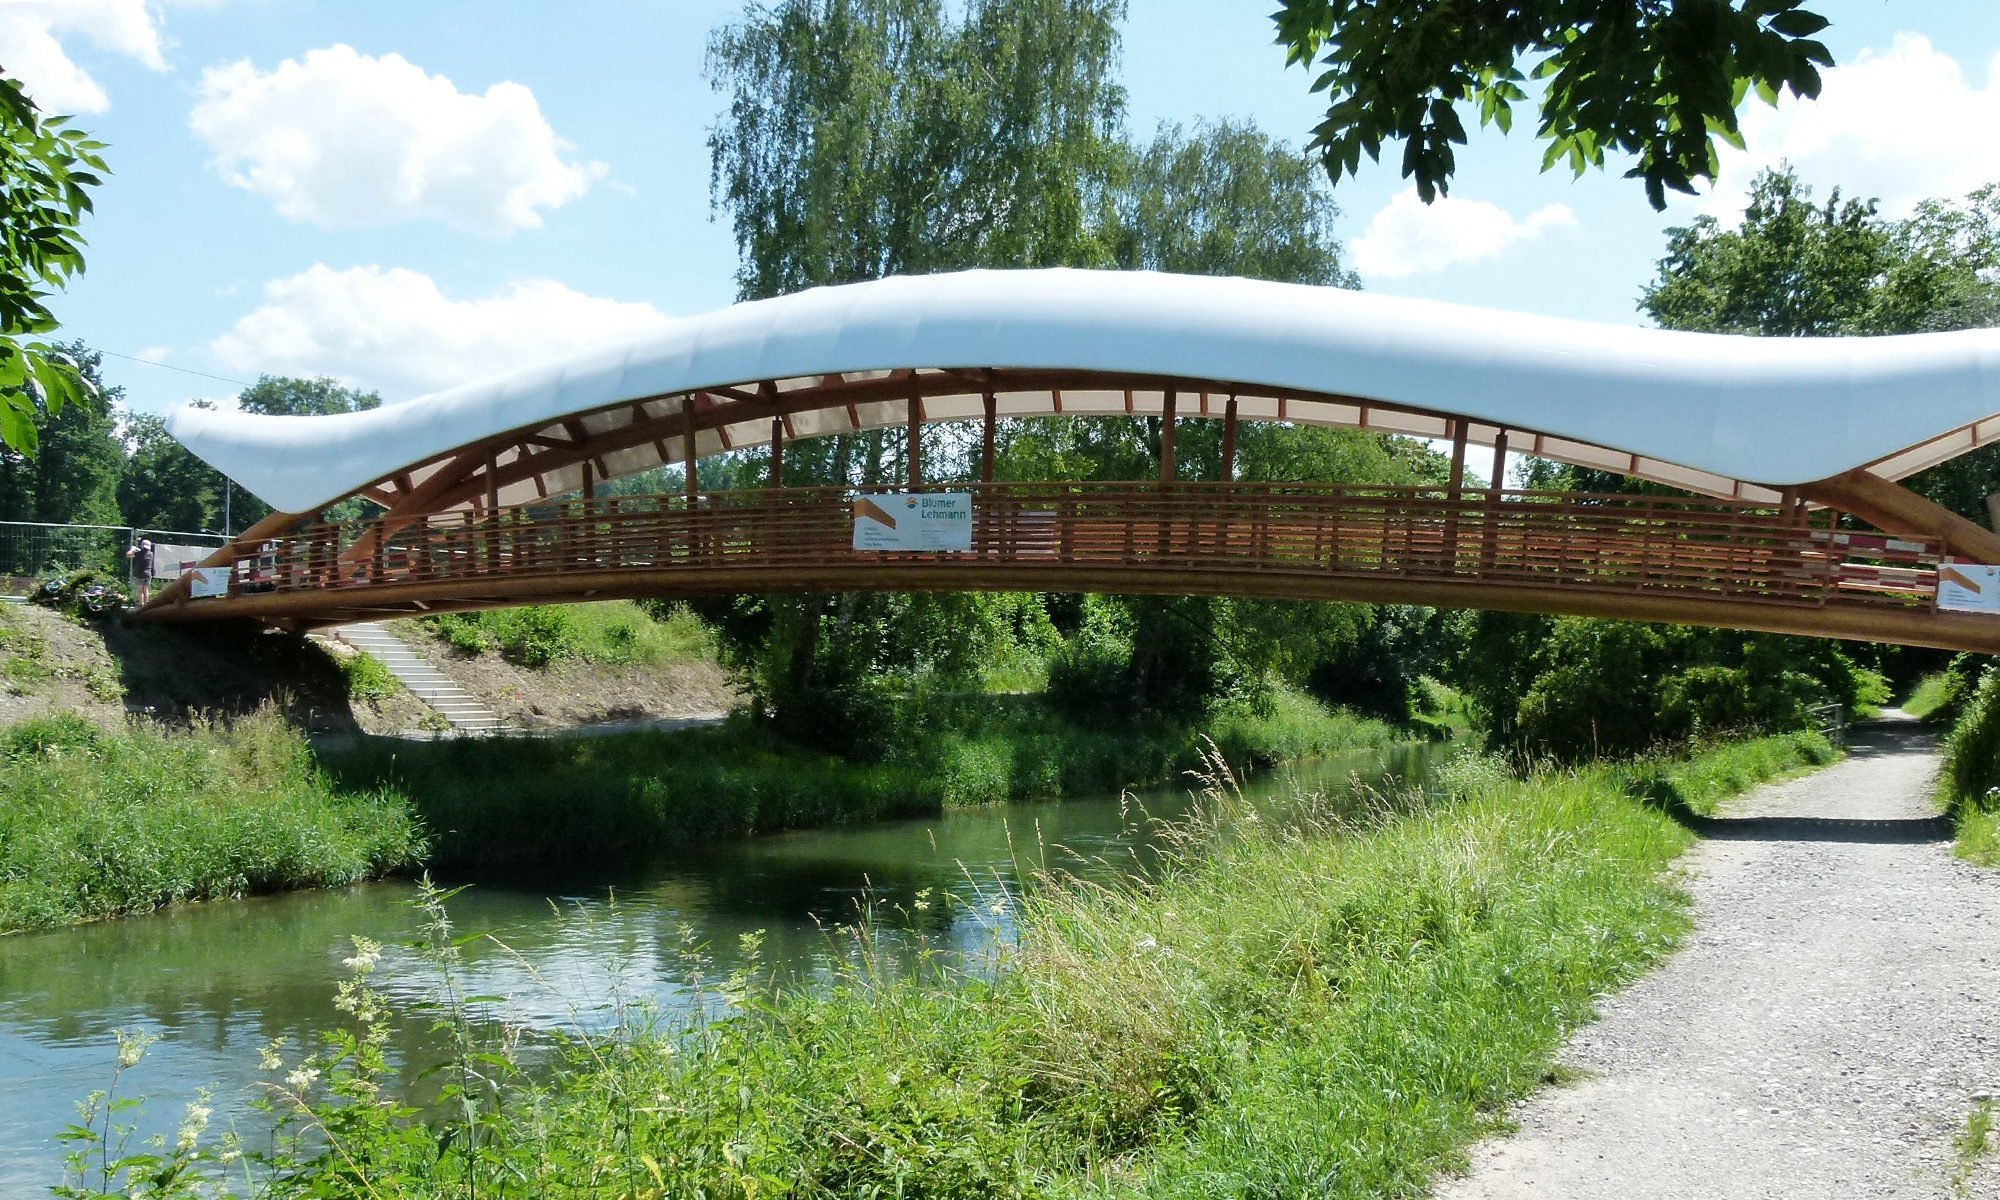 Overall view of the Aubrugg timber art bridge with white curved canopy in fine weather